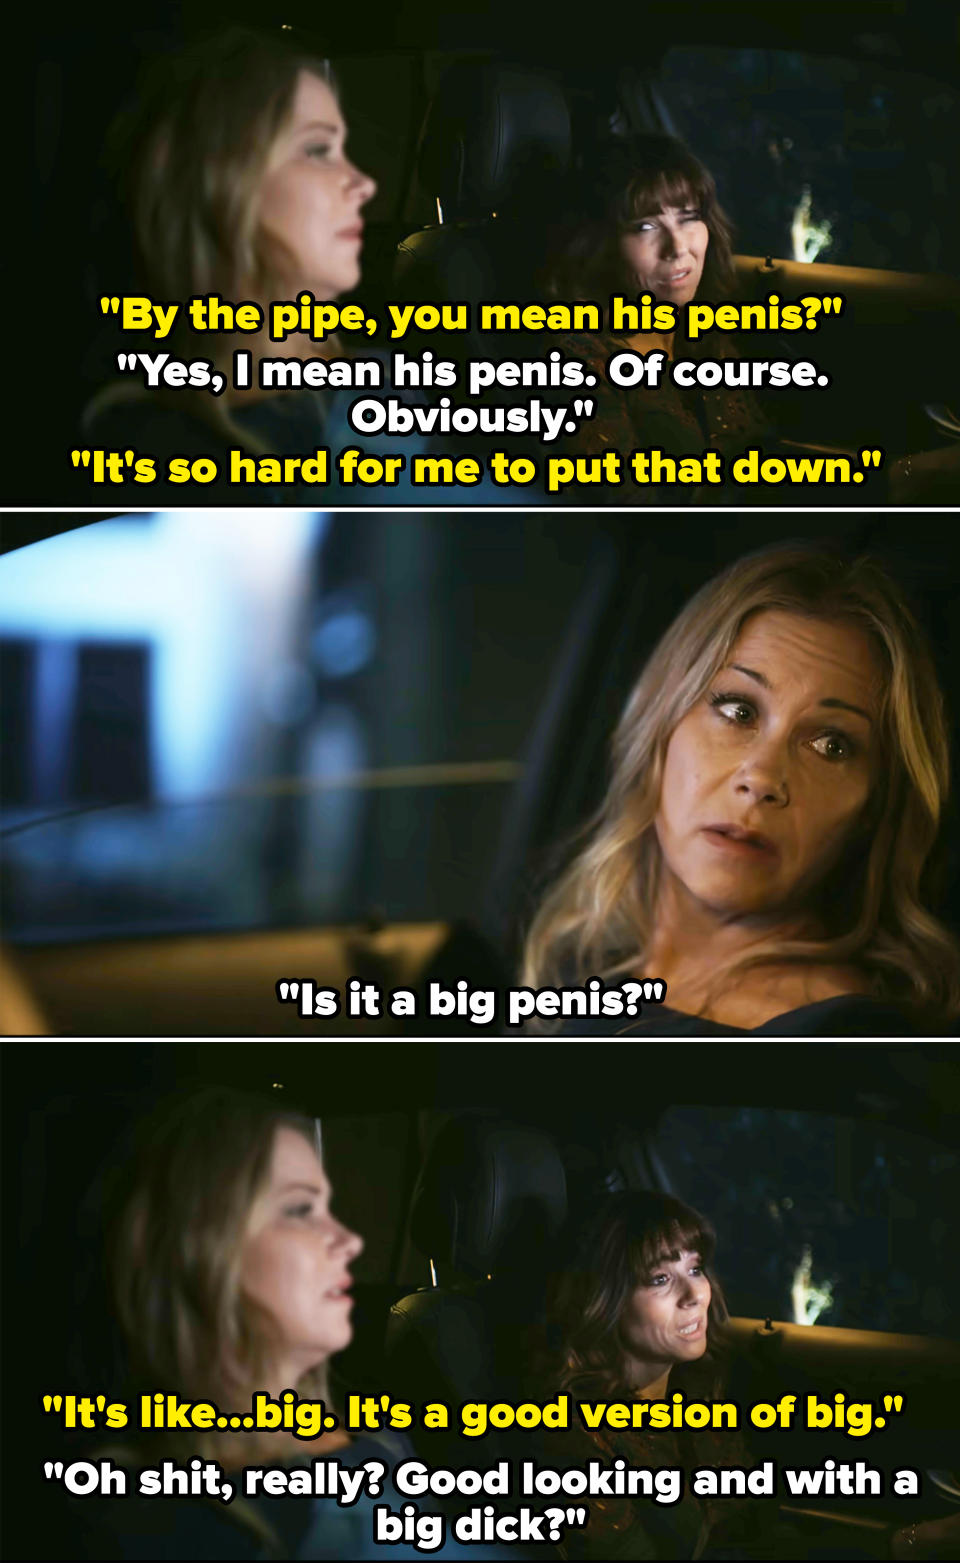 Jen and Judy joking about Steve's penis, with Judy revealing that it's big